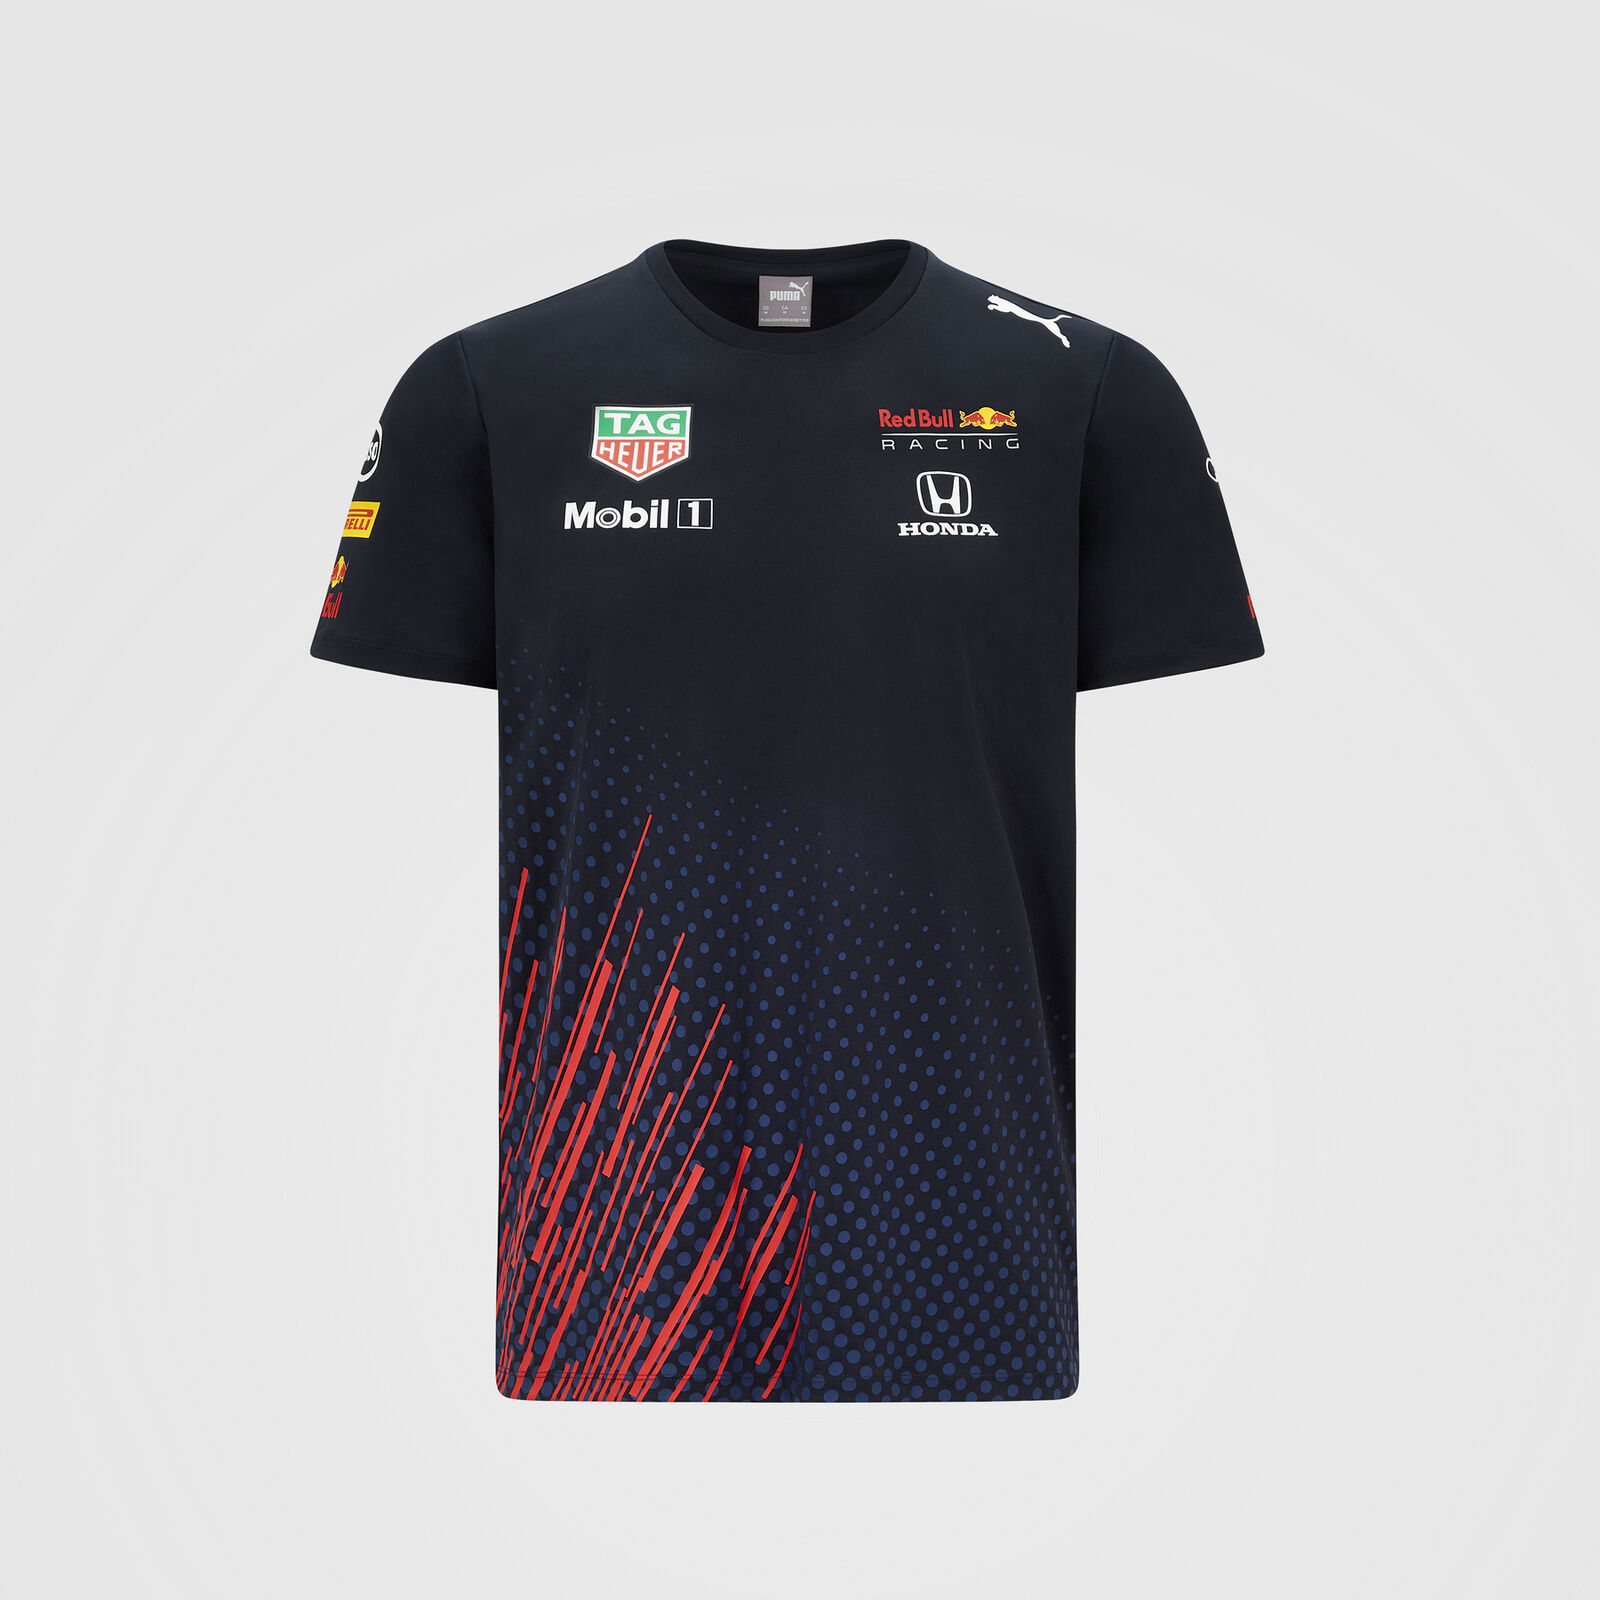 2021 Team T-Shirt Red Bull Racing Fuel For